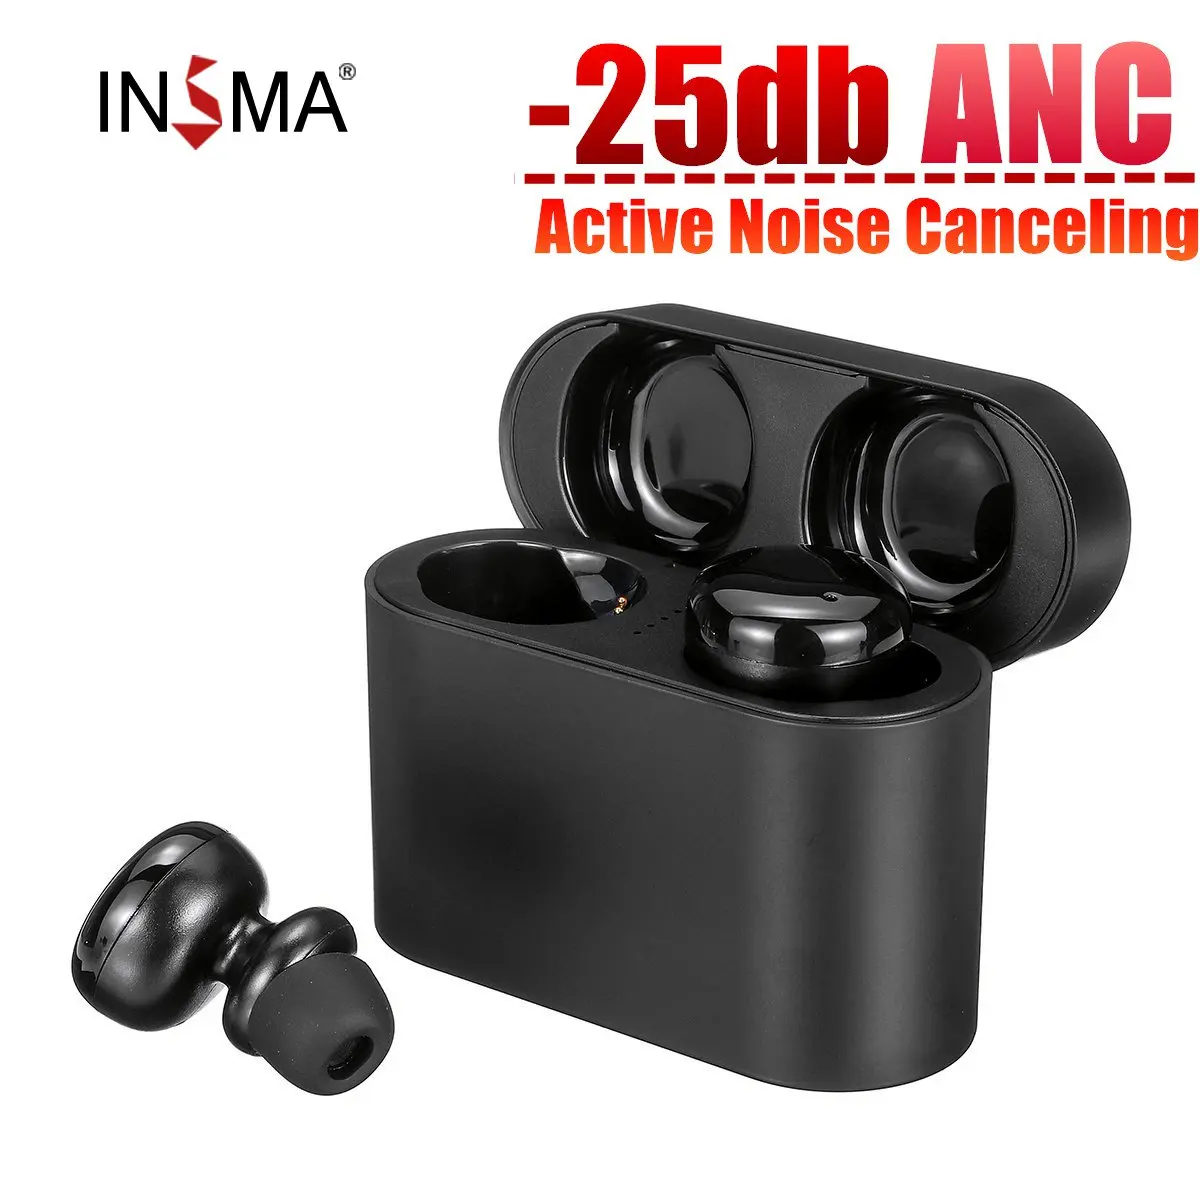 

ANC Active Noise Canceling bluetooth 5.0 Earphones TWS Wireless Earphones blutooth Earphone Headphone Sports Earbuds Headset